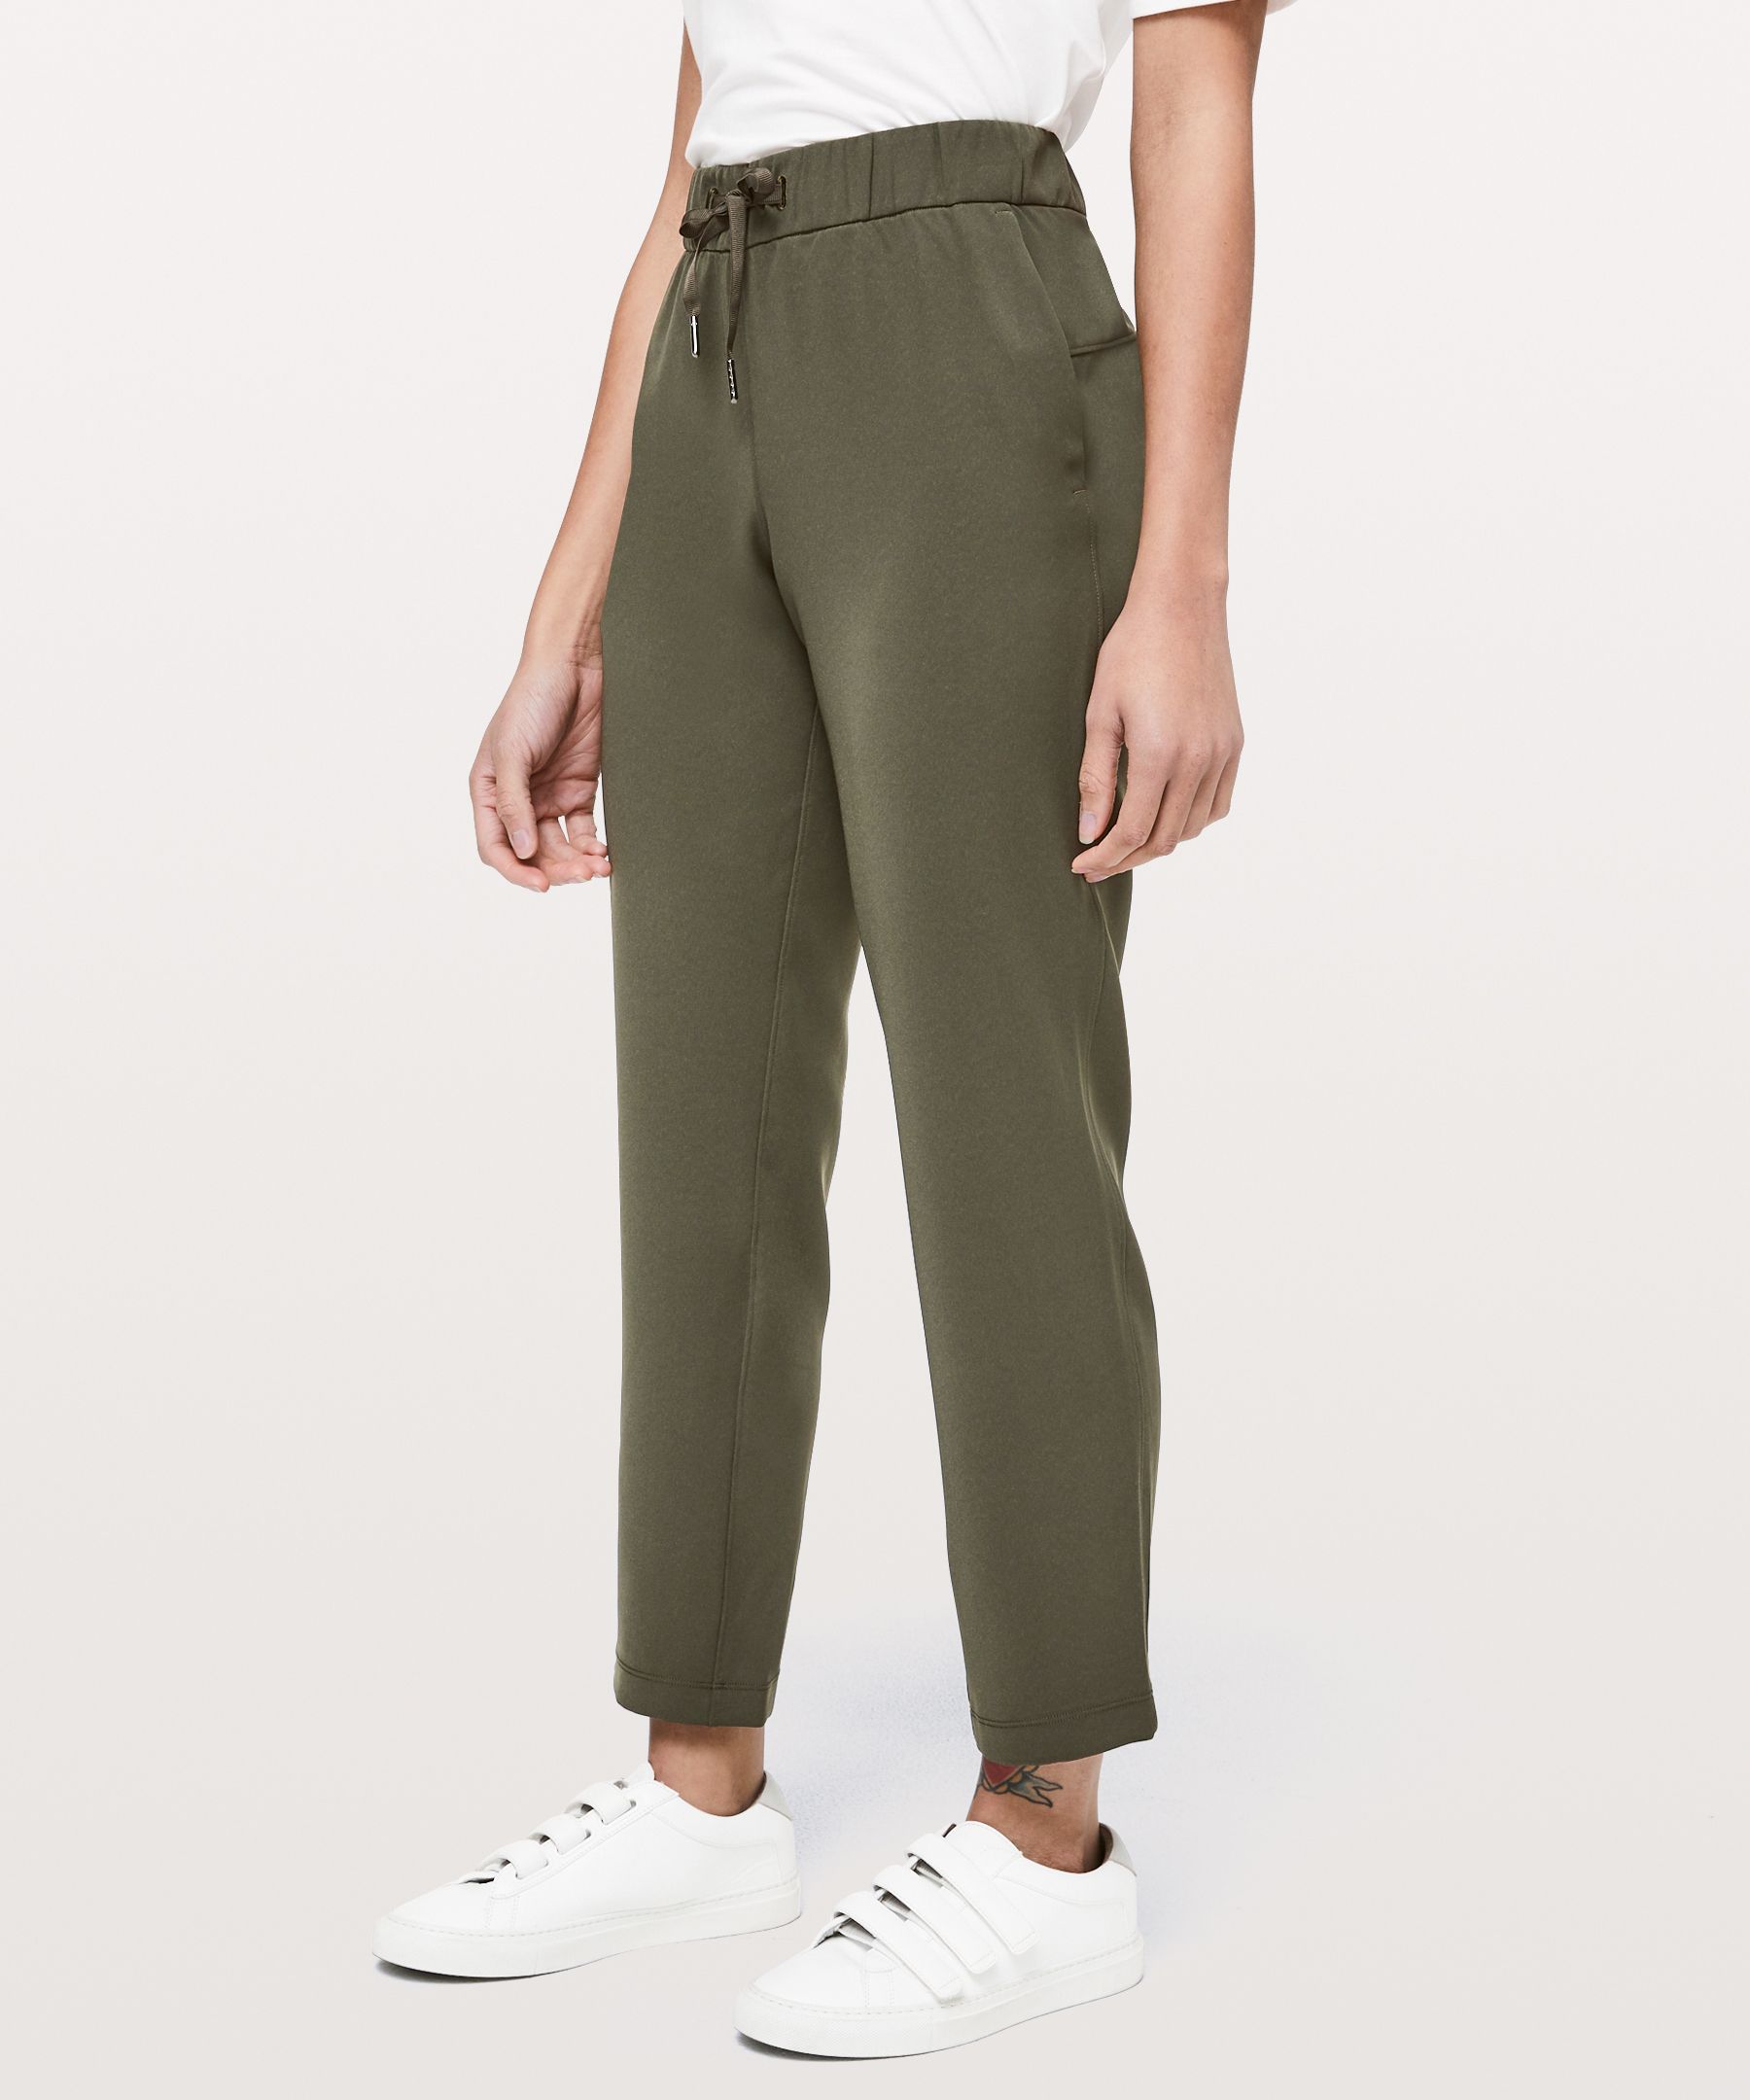 Lululemon On The Fly 7/8 Pant Woven Dry